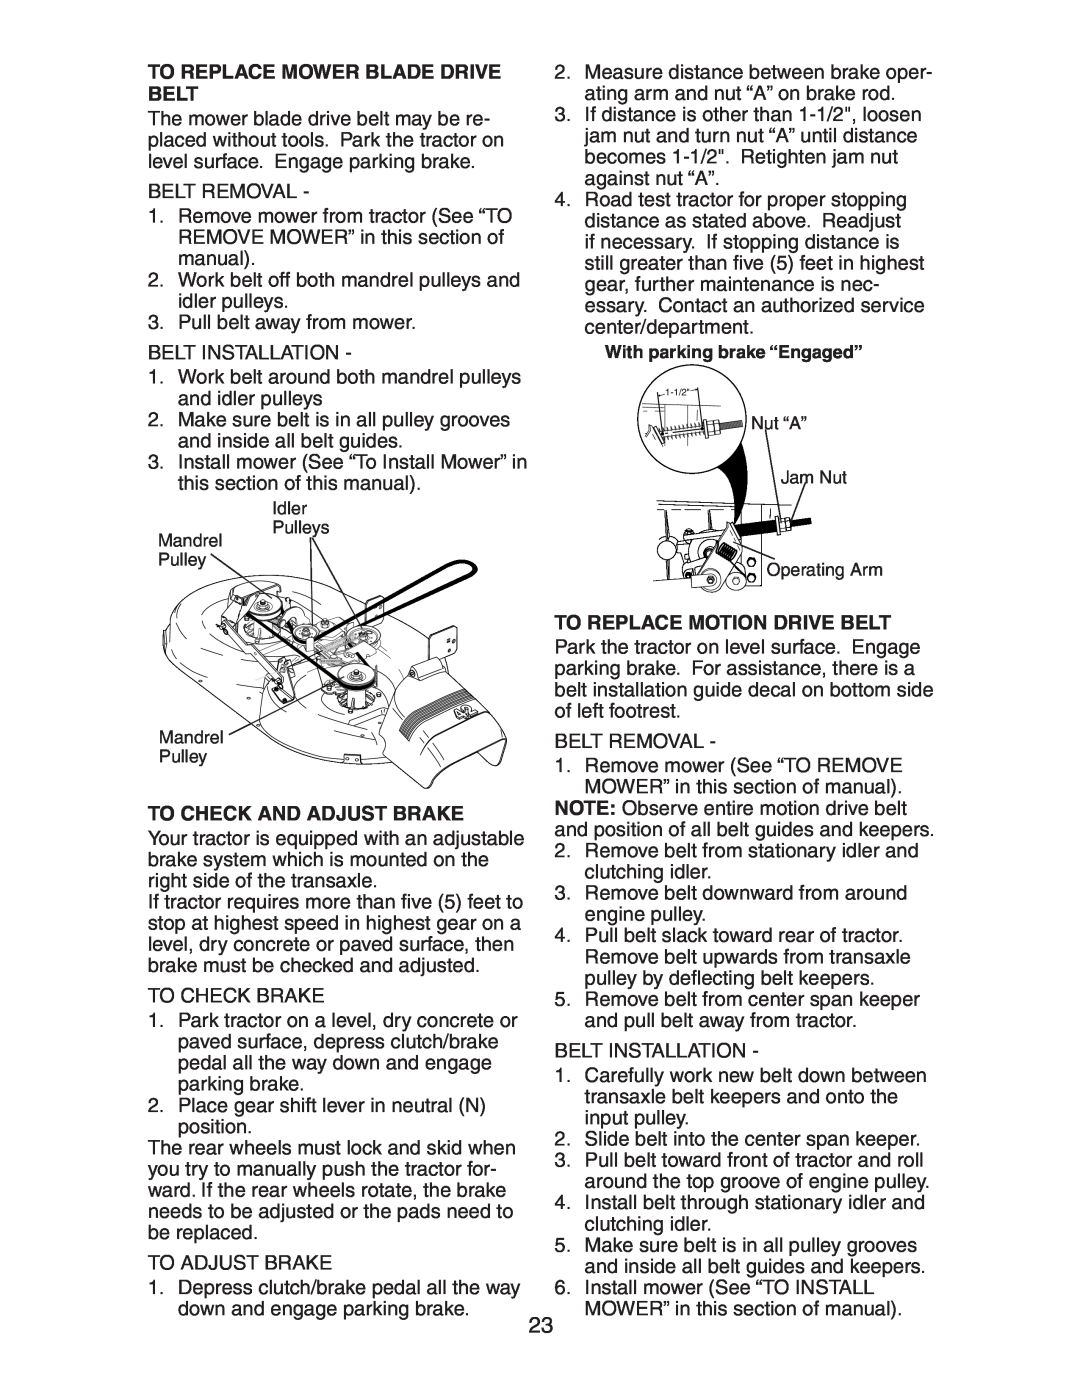 Electrolux AG17542STA manual To Replace Mower Blade Drive Belt, To Check And Adjust Brake, To Replace Motion Drive Belt 